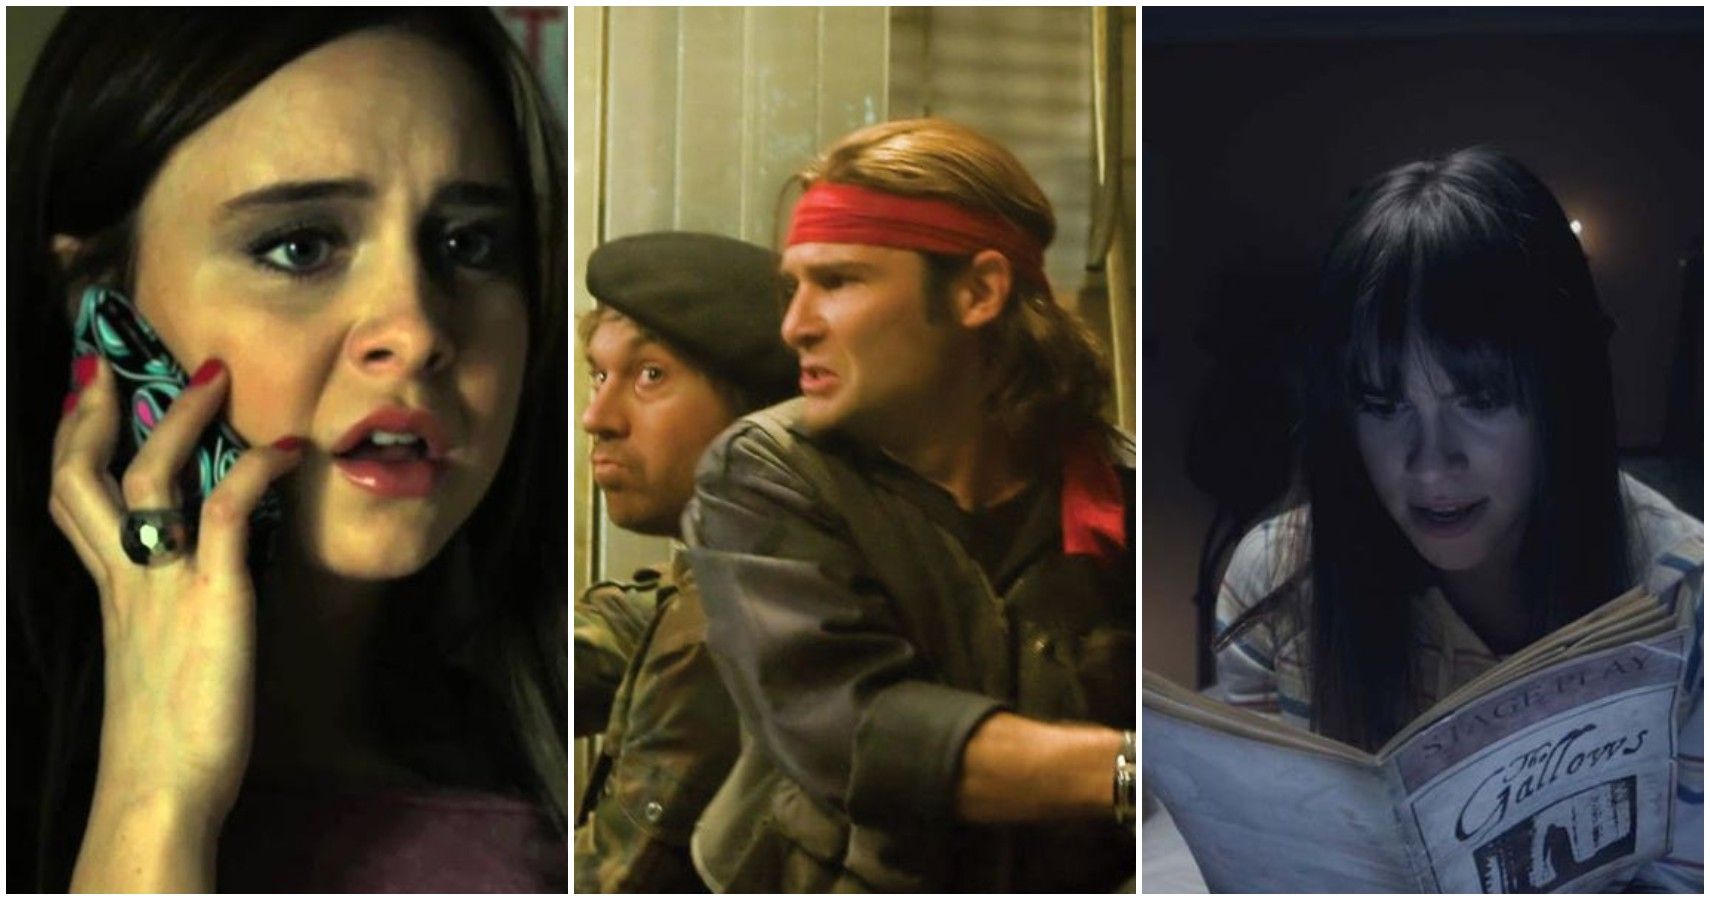 The 10 Worst Horror Movies Of The Decade (According To Rotten Tomatoes)